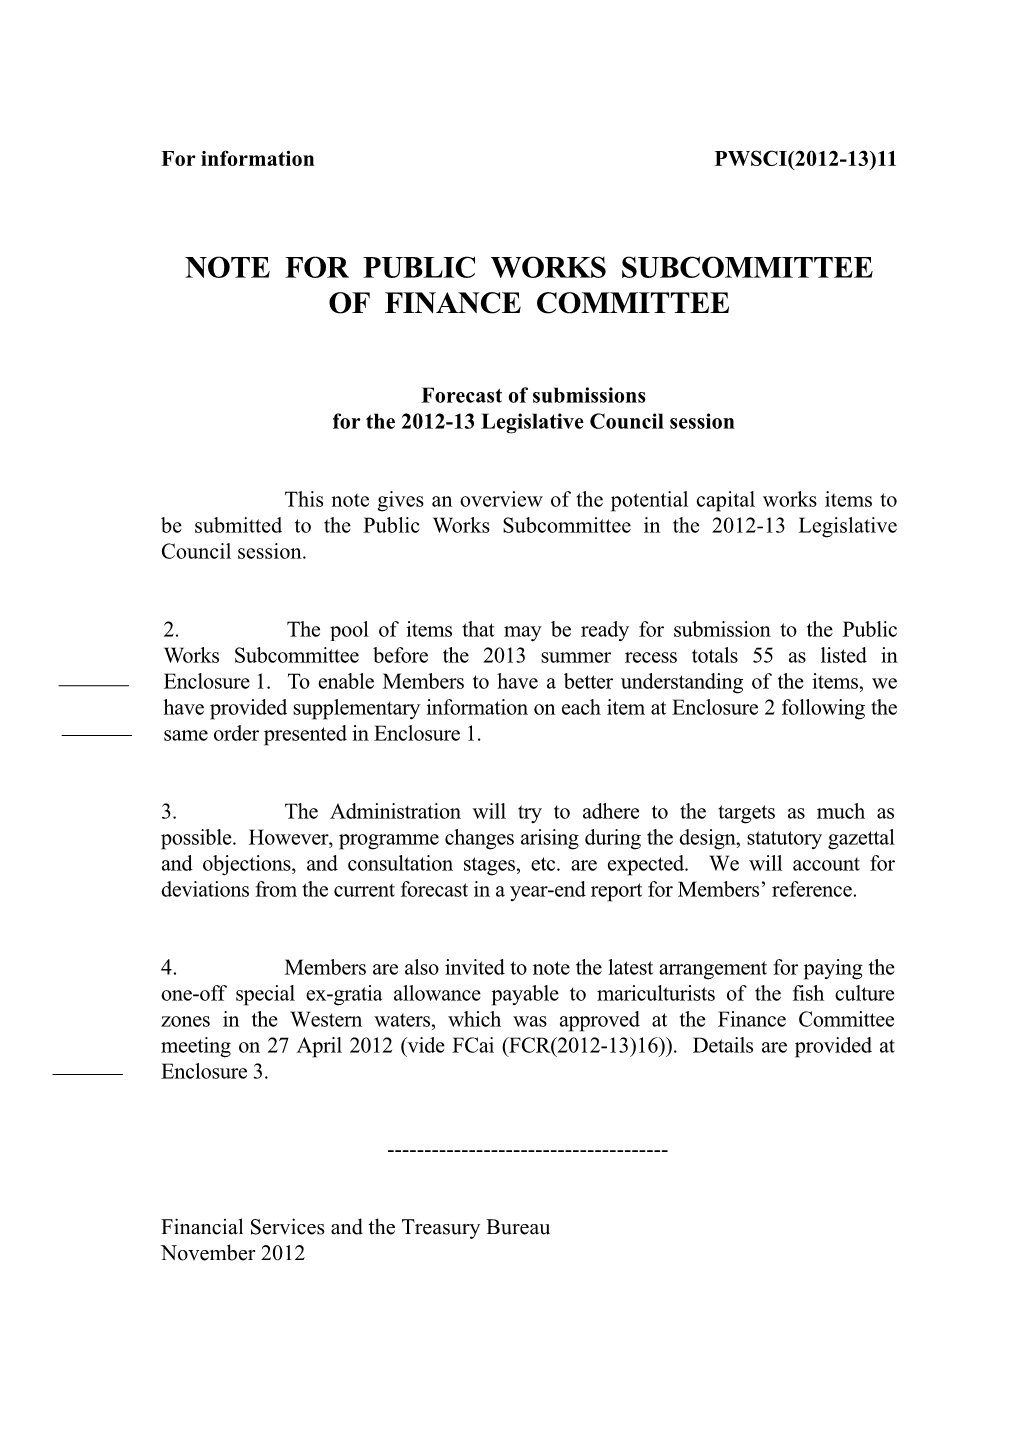 Note for Public Works Subcommittee of Finance Committee